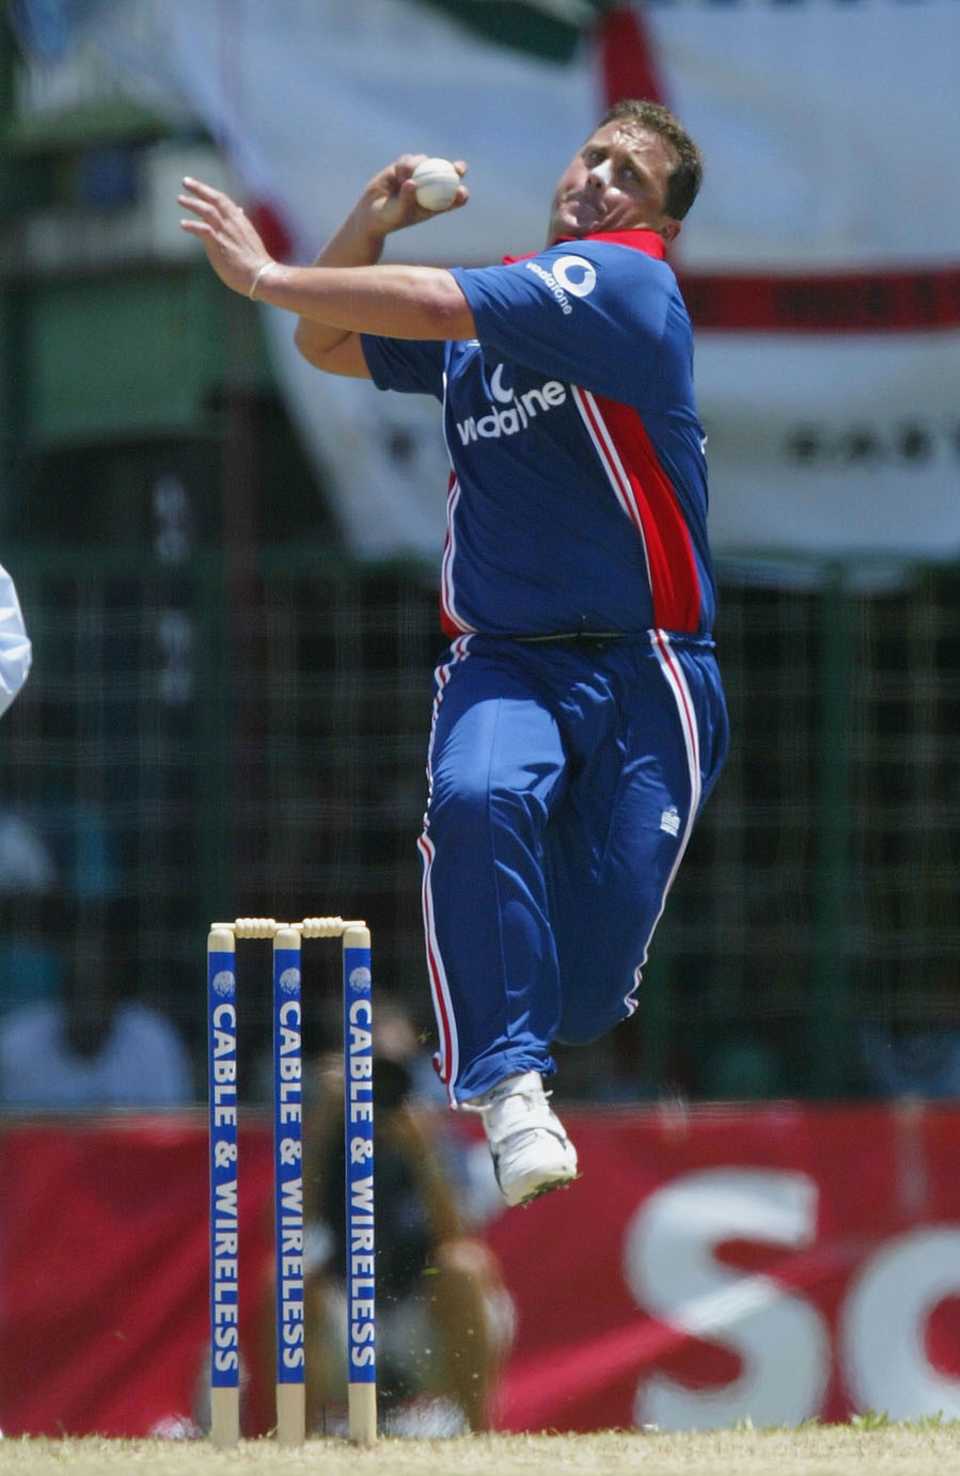 Darren Gough winds up to deliver a ball